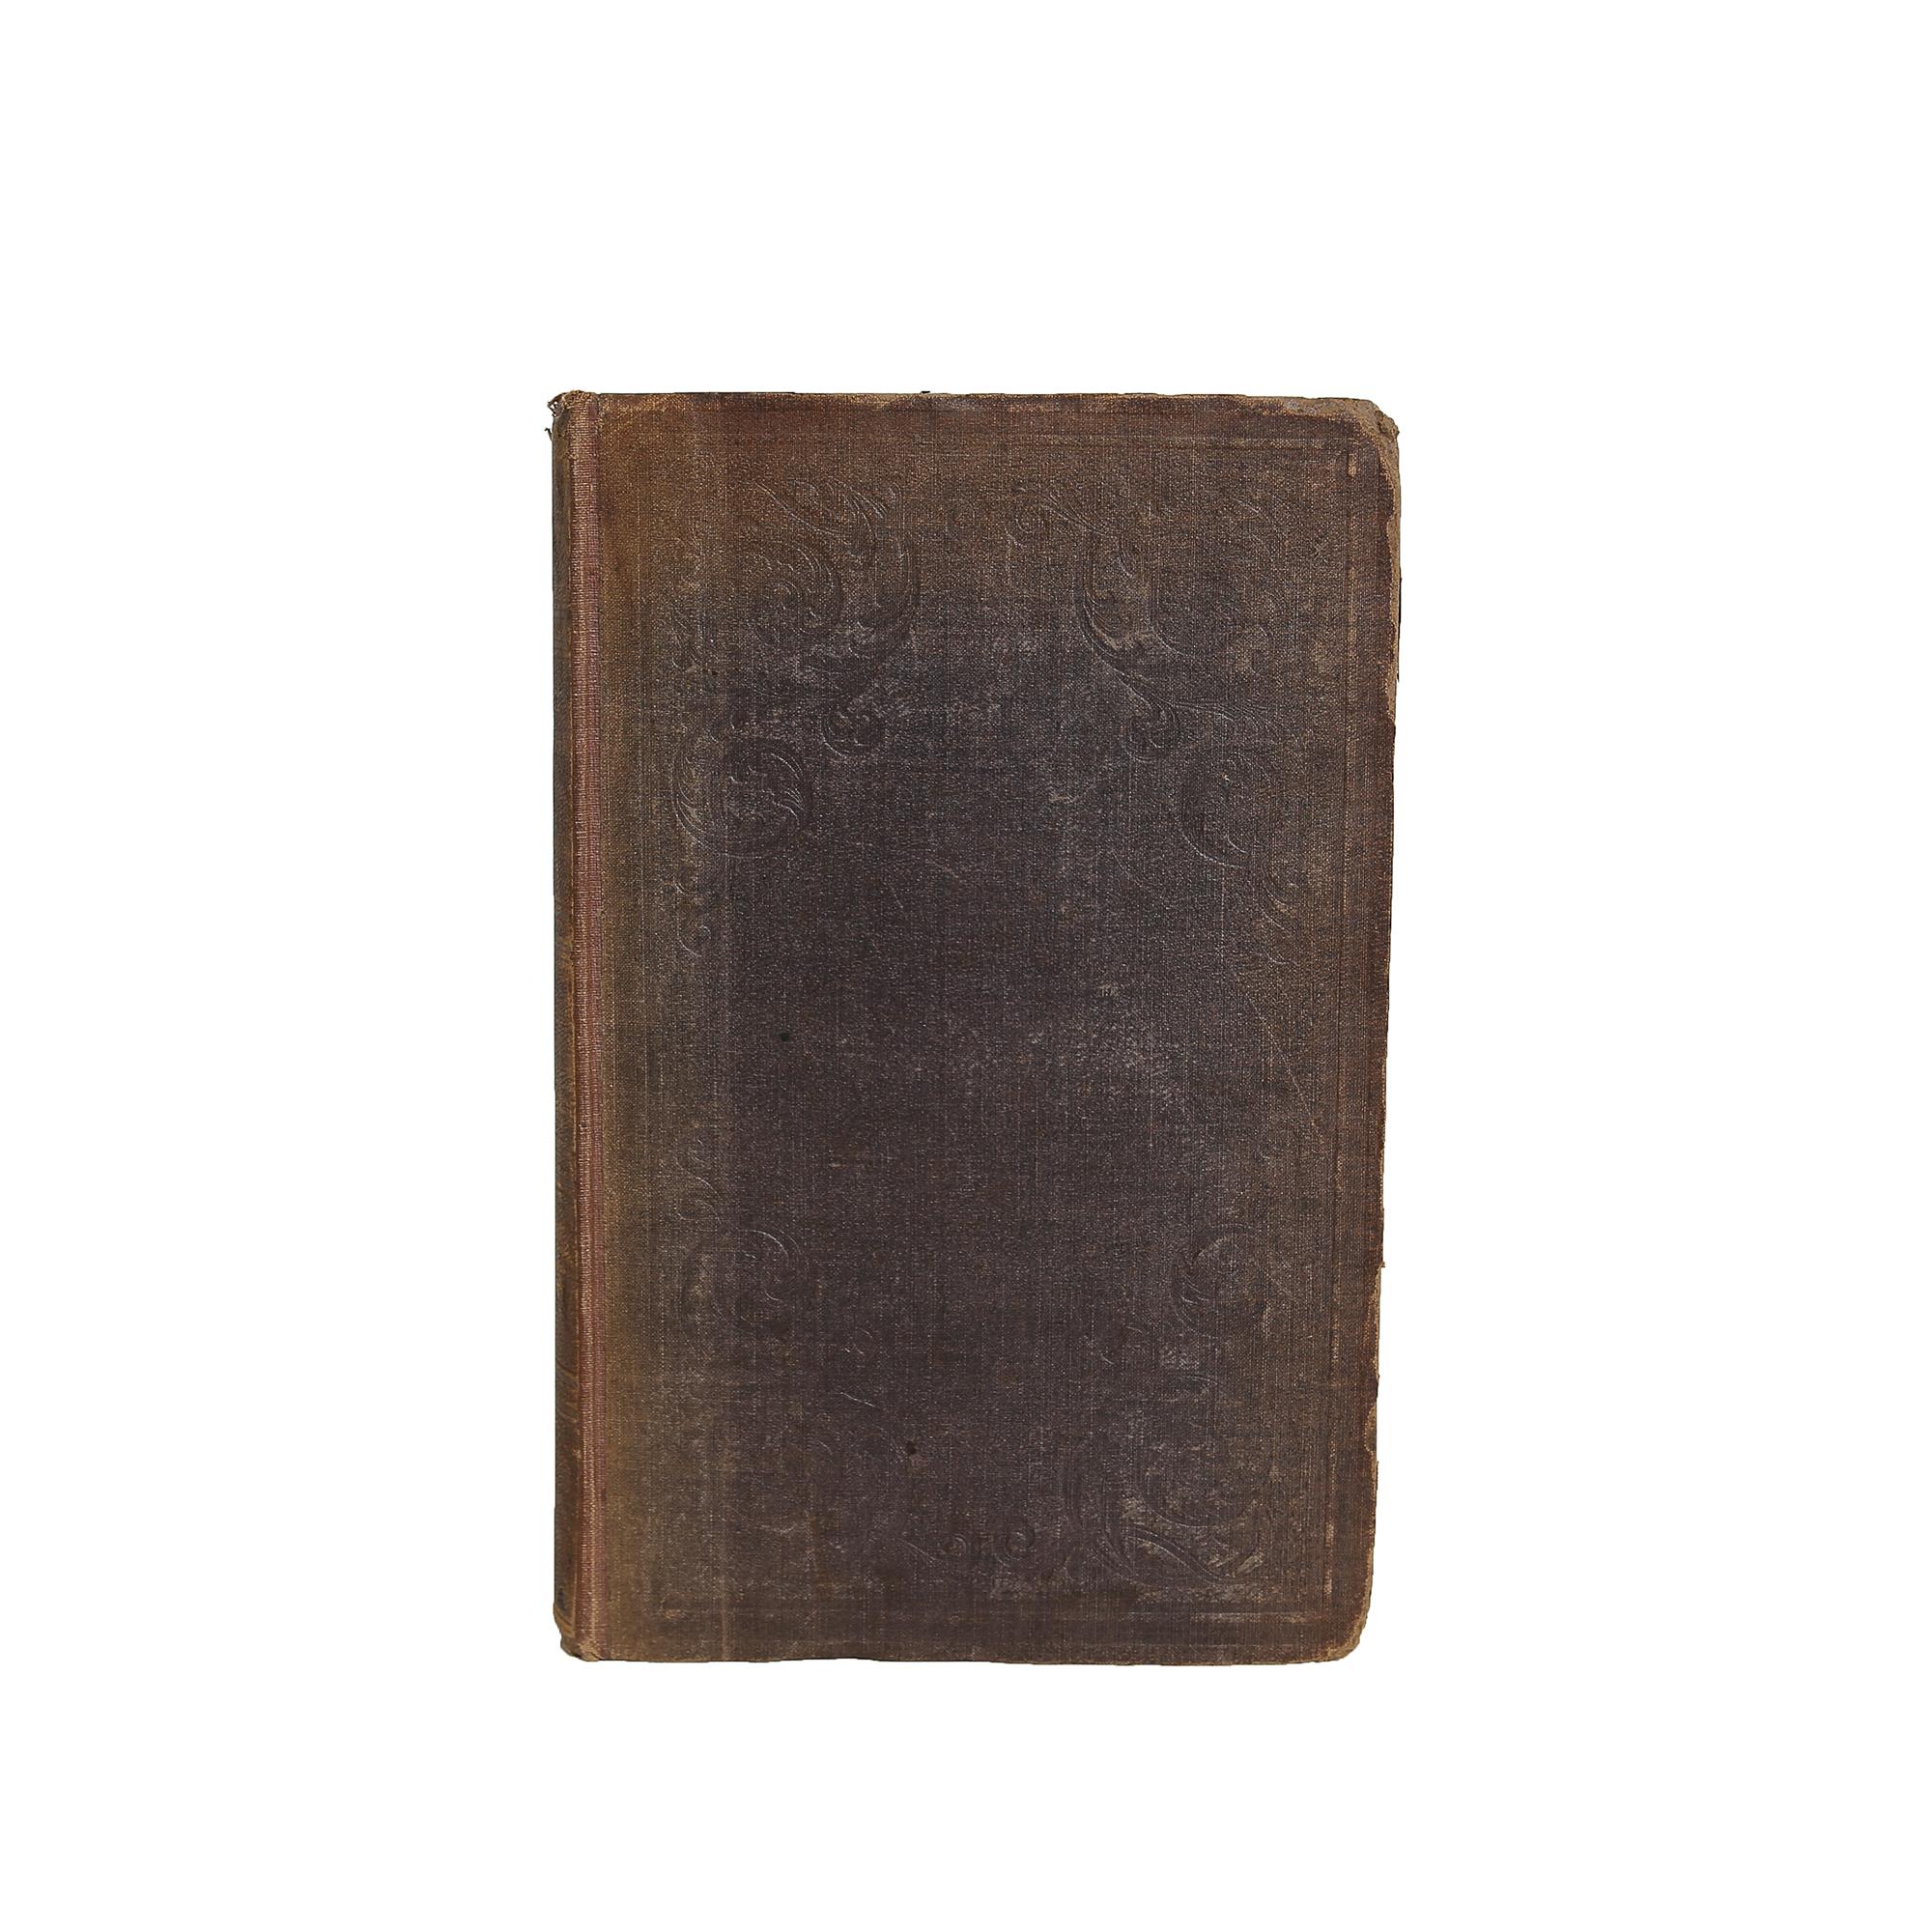 Paper William Wordsworth's The Prelude, First Edition 1850 For Sale